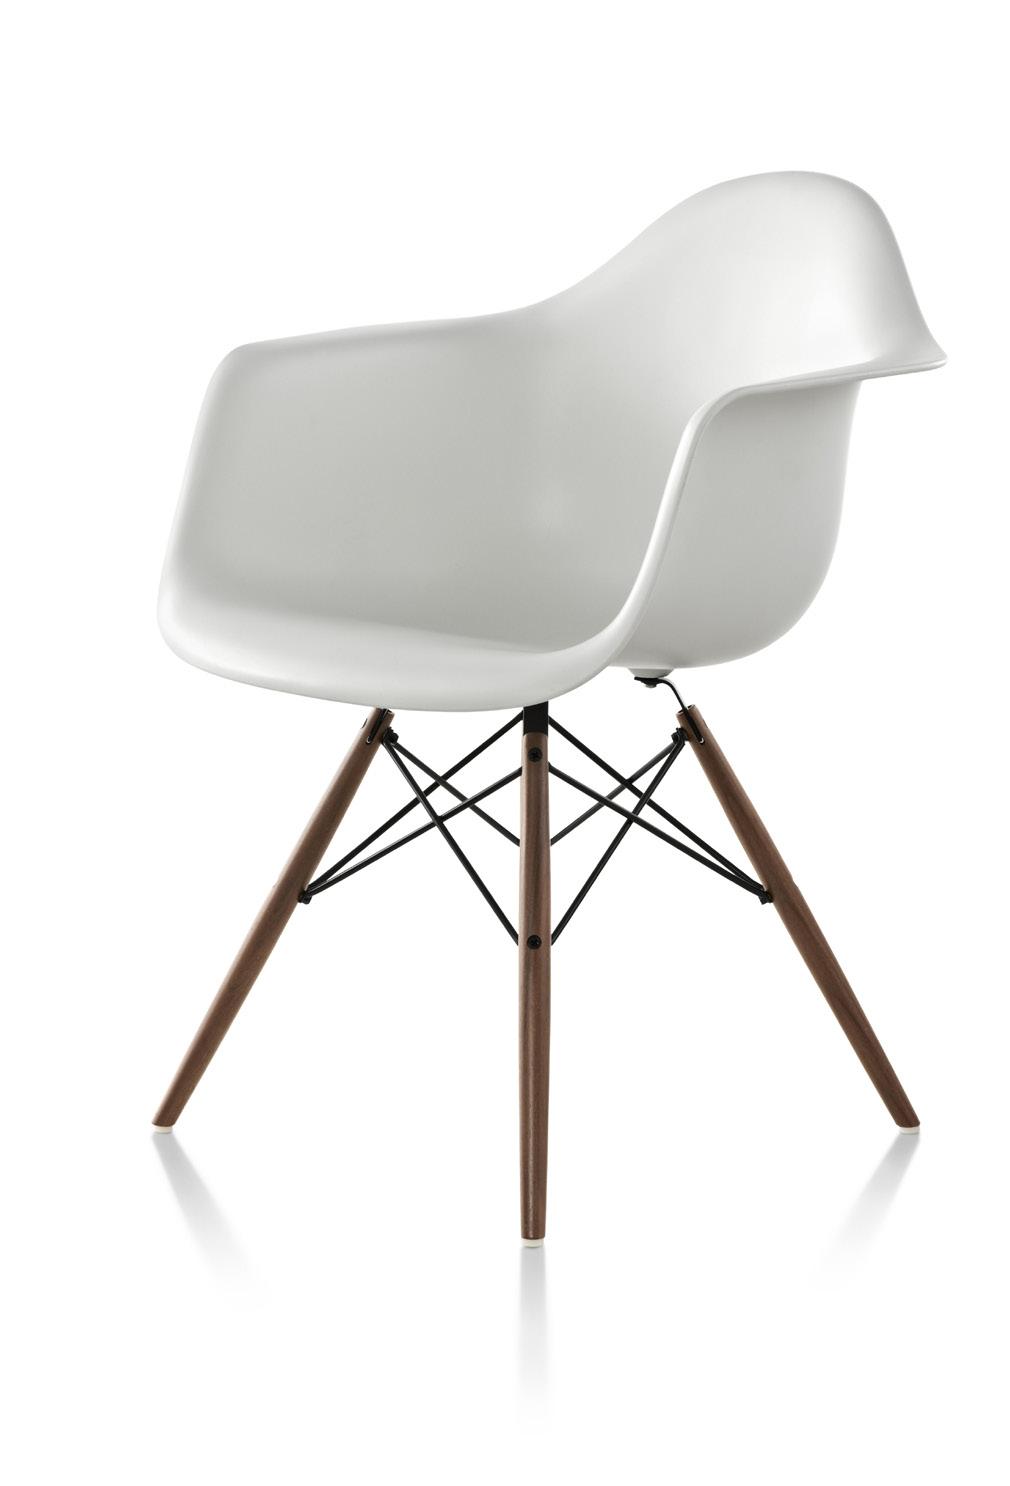 . Eames Molded Plastic Armchair Dowel Base This enduring chair, originally designed in 1948 by, epitomizes the designers mantra of the best for the most for the least.